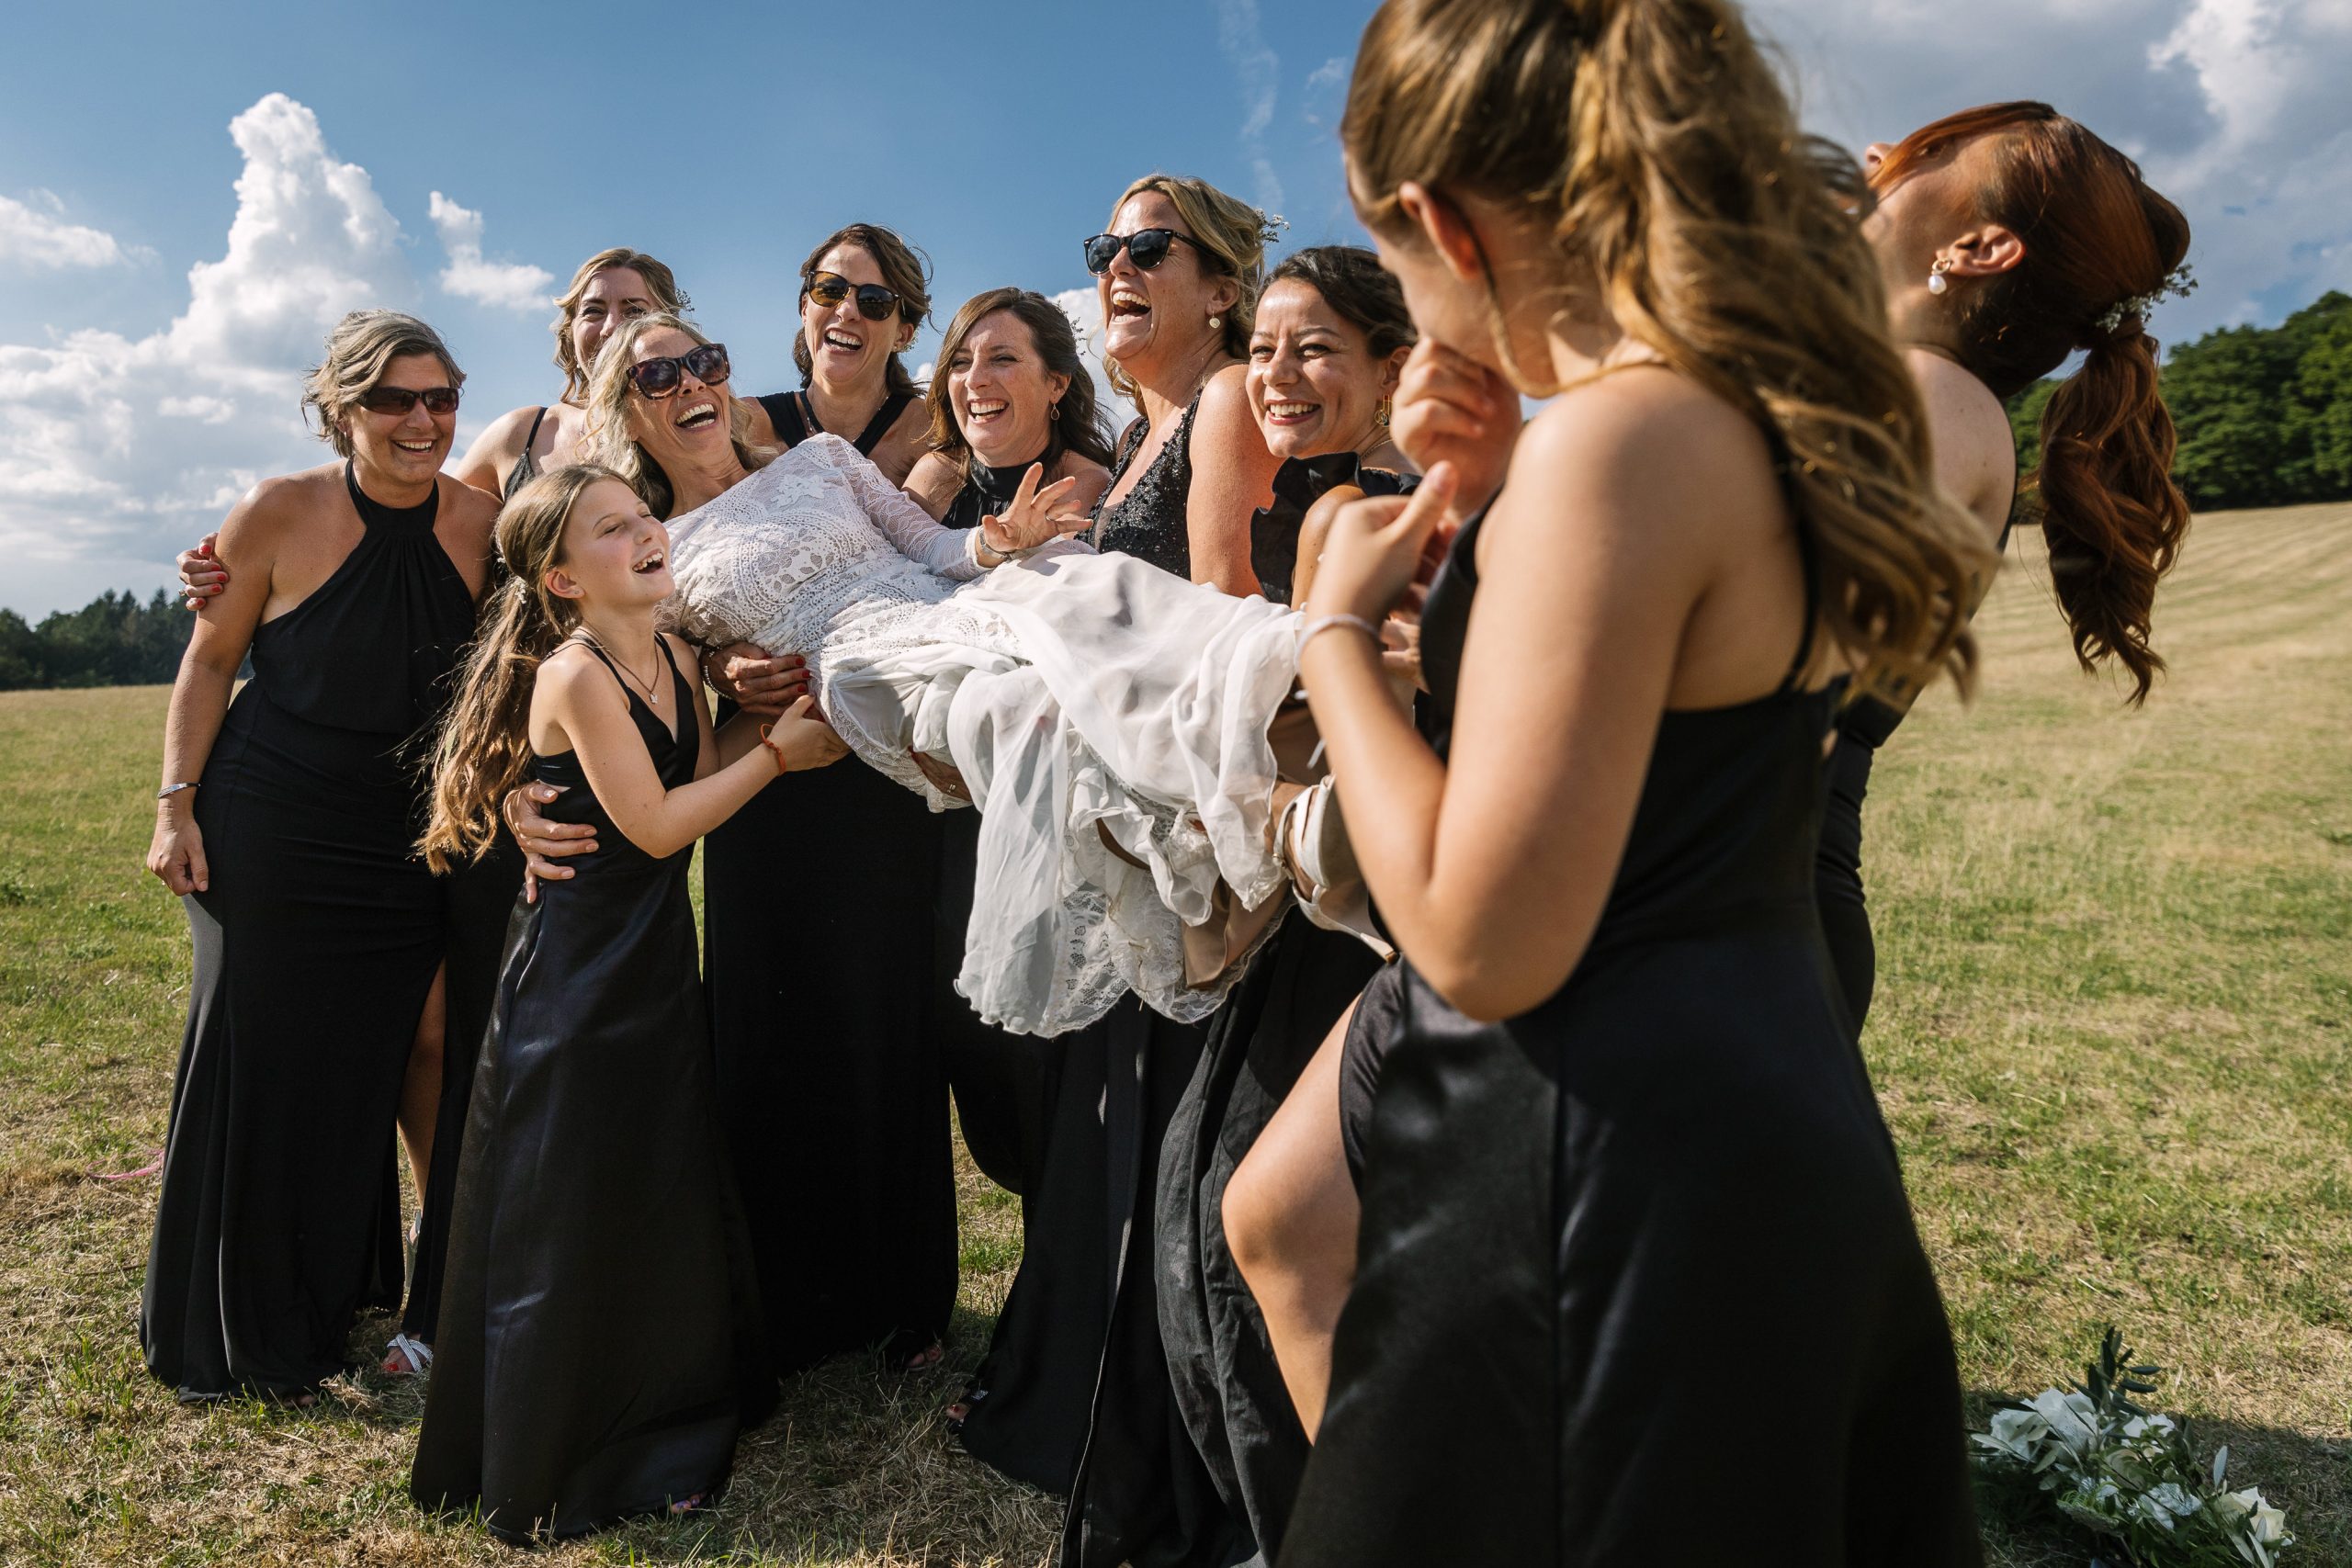 bride and bridesmaids having fun during the outdoor wedding reception natural unposed candid wedding photography by LGBTQ_friendly documentary wedding photographer surrey sussex